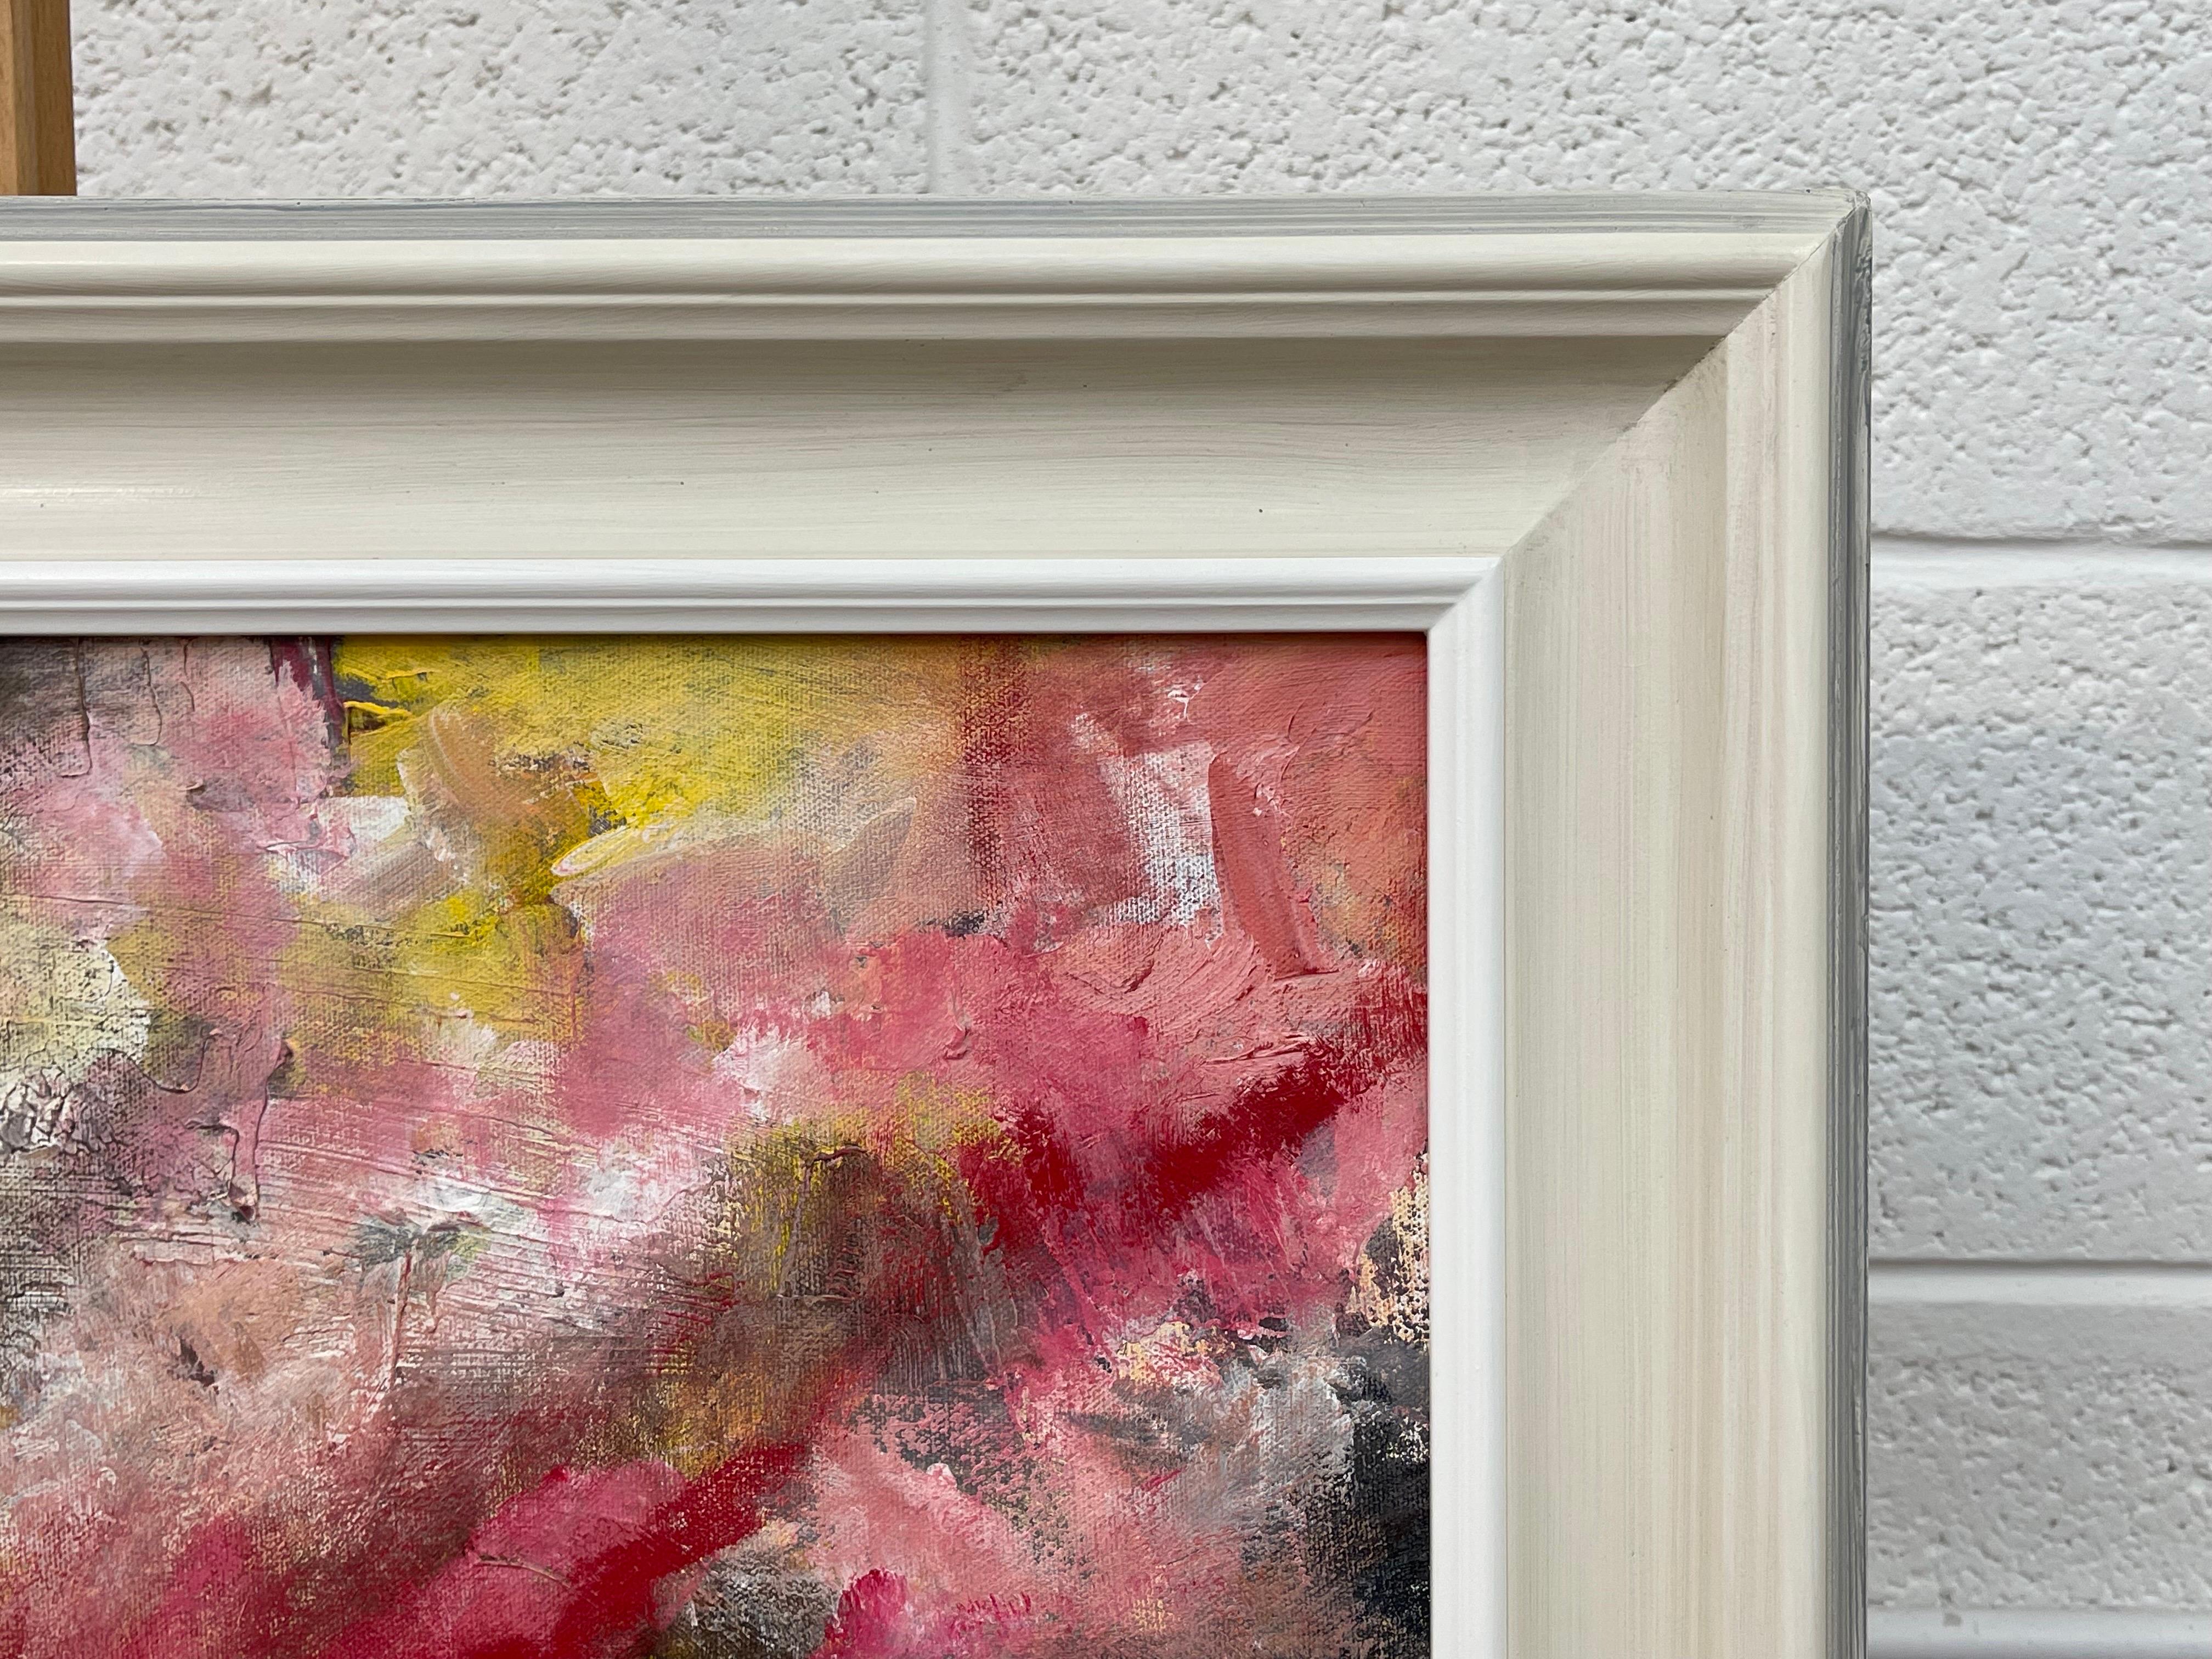 Abstract Landscape using Red, Black and Yellow by Contemporary British Artist For Sale 2